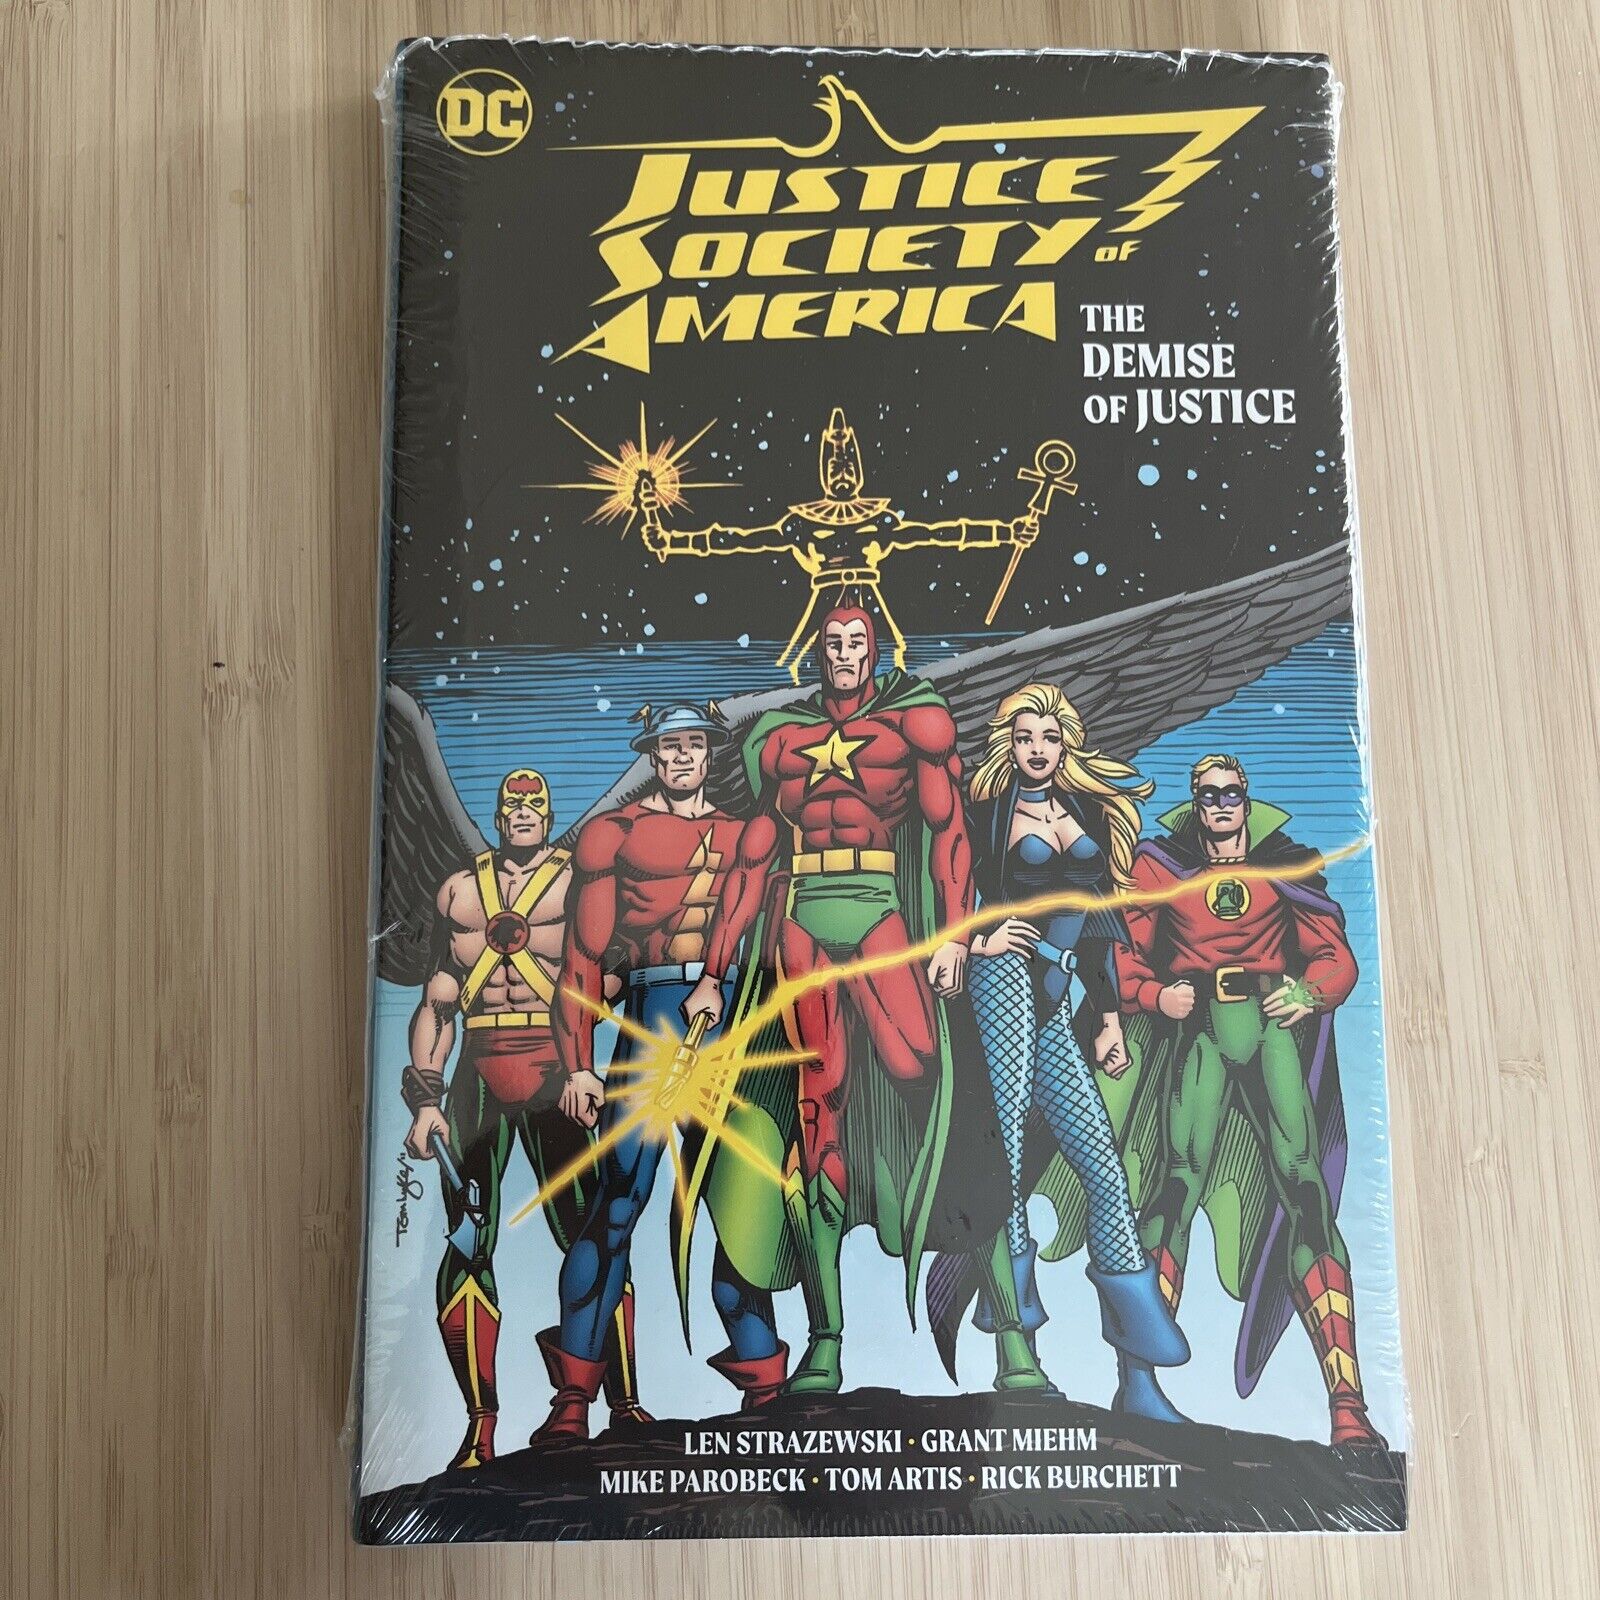 Justice Society of America The Demise of Justice DC Comics Hardcover - New